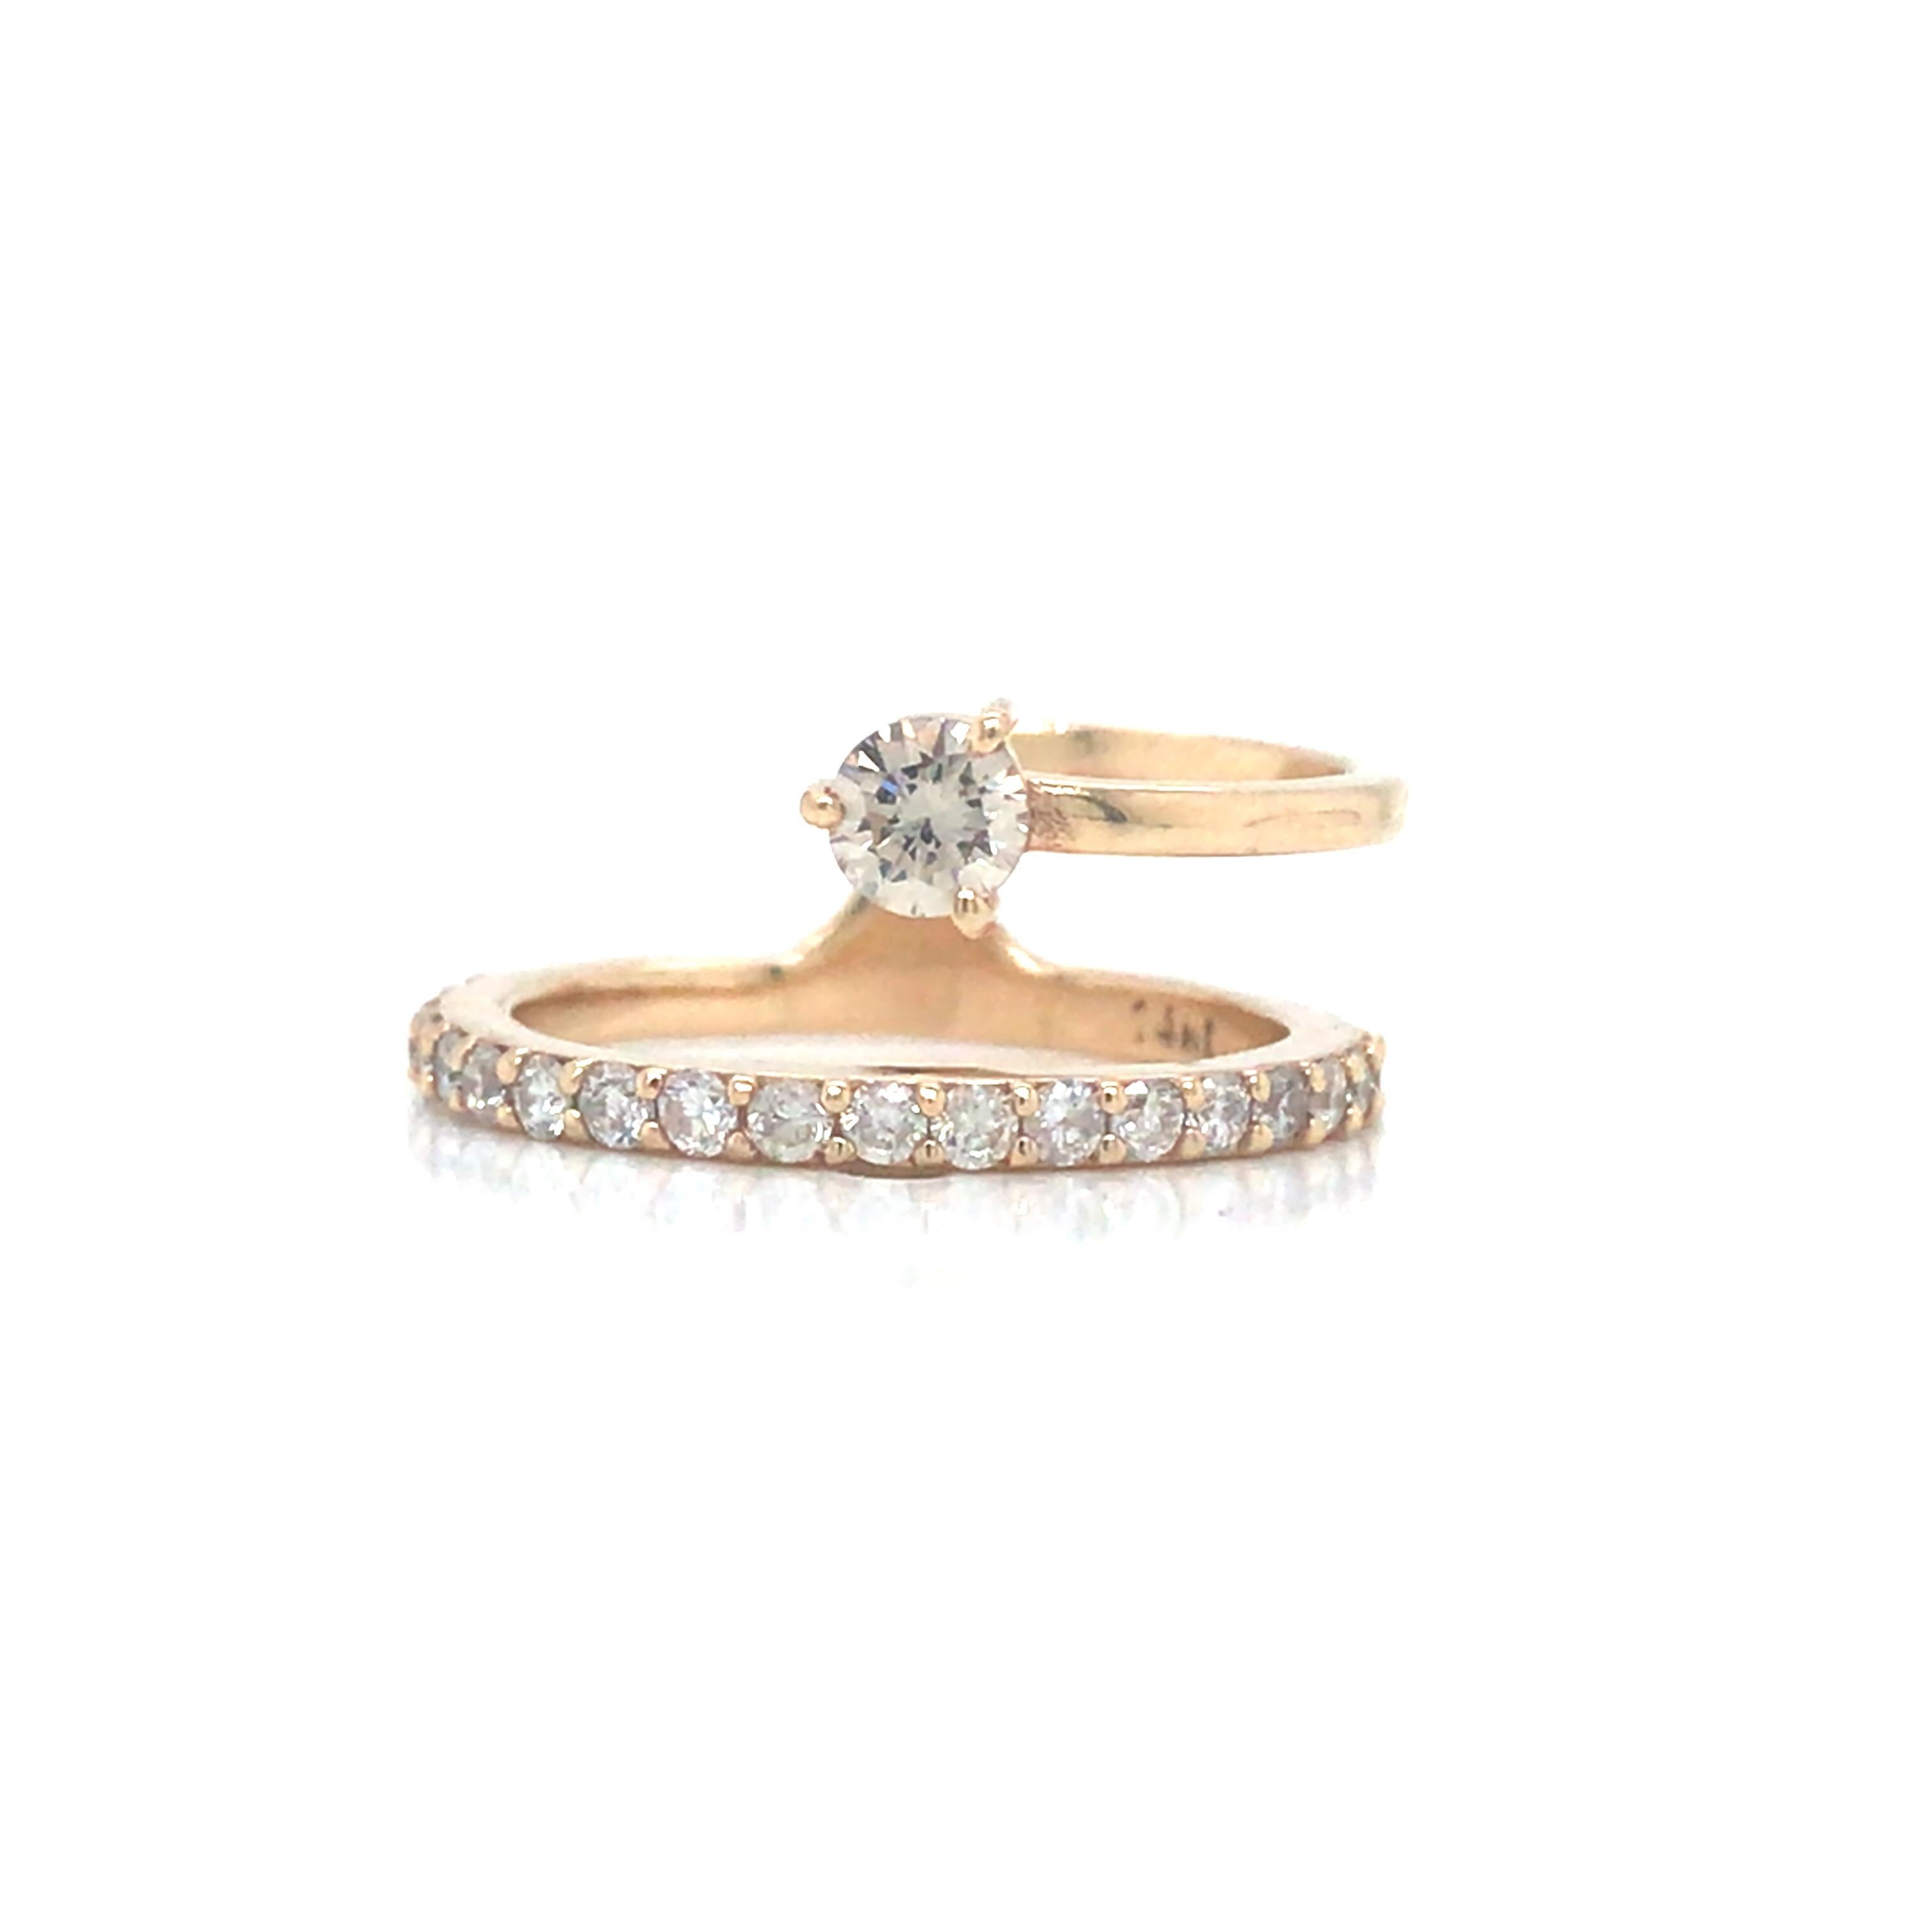 Diamond Fashion Ring in 14K Yellow Gold.  Round Brilliant Cut Diamonds weighing 0.48 carat total weight, G-H In color and VS-SI in clarity are expertly set.  The Ring measures 3/8 inch at the widest point.  Ring size 4 1/2.  2.64 grams.